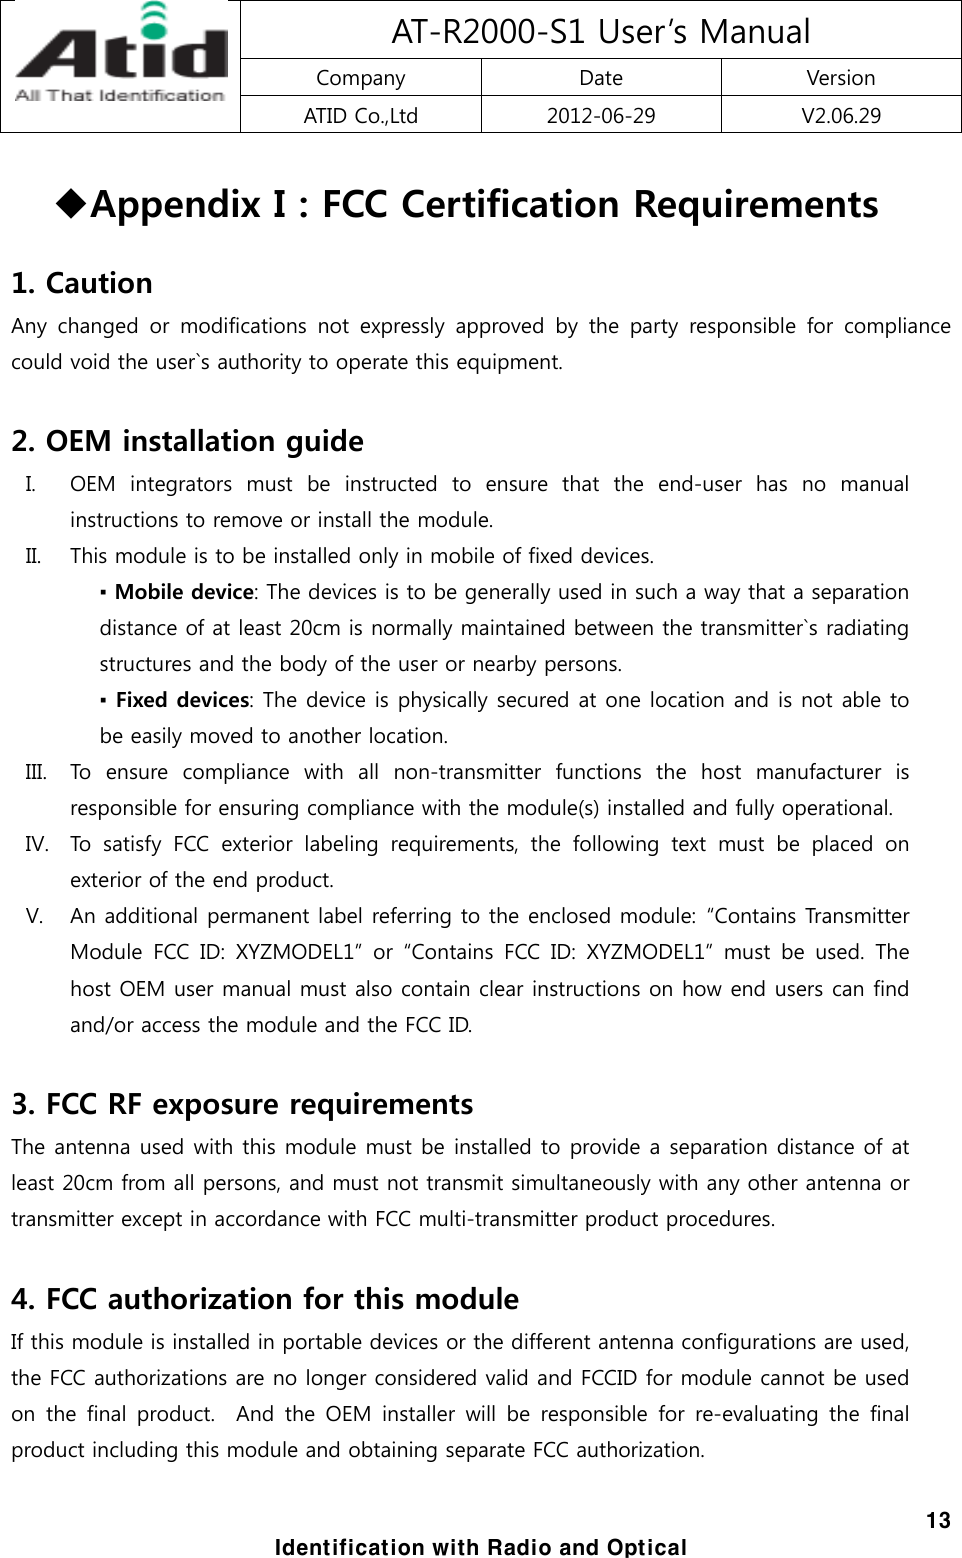 AT-R2000-S1 User’s Manual Company  Date  Version ATID Co.,Ltd  2012-06-29  V2.06.29  13 Identification with Radio and Optical  Appendix I : FCC Certification Requirements  1. Caution Any  changed  or  modifications  not expressly approved by the party  responsible  for  compliance could void the user`s authority to operate this equipment.  2. OEM installation guide I. OEM  integrators  must  be  instructed  to  ensure  that  the  end-user  has  no  manual instructions to remove or install the module. II. This module is to be installed only in mobile of fixed devices. ▪ Mobile device: The devices is to be generally used in such a way that a separation distance of at least 20cm is normally maintained between the transmitter`s radiating structures and the body of the user or nearby persons. ▪ Fixed devices: The device is physically secured at one location and is not able to be easily moved to another location. III. To ensure compliance with all non-transmitter functions the host  manufacturer  is responsible for ensuring compliance with the module(s) installed and fully operational. IV. To  satisfy  FCC  exterior  labeling  requirements,  the  following  text must be placed on exterior of the end product. V. An additional permanent label referring to the enclosed module:  “Contains Transmitter Module FCC ID: XYZMODEL1” or “Contains FCC ID: XYZMODEL1” must be used. The host OEM user manual must also contain clear instructions on how end users can find and/or access the module and the FCC ID.  3. FCC RF exposure requirements The antenna used with this module must be installed to provide a separation distance of at least 20cm from all persons, and must not transmit simultaneously with any other antenna or transmitter except in accordance with FCC multi-transmitter product procedures.  4. FCC authorization for this module If this module is installed in portable devices or the different antenna configurations are used, the FCC authorizations are no longer considered valid and FCCID for module cannot be used on the final product.  And the OEM installer will be responsible  for  re-evaluating  the  final product including this module and obtaining separate FCC authorization.   